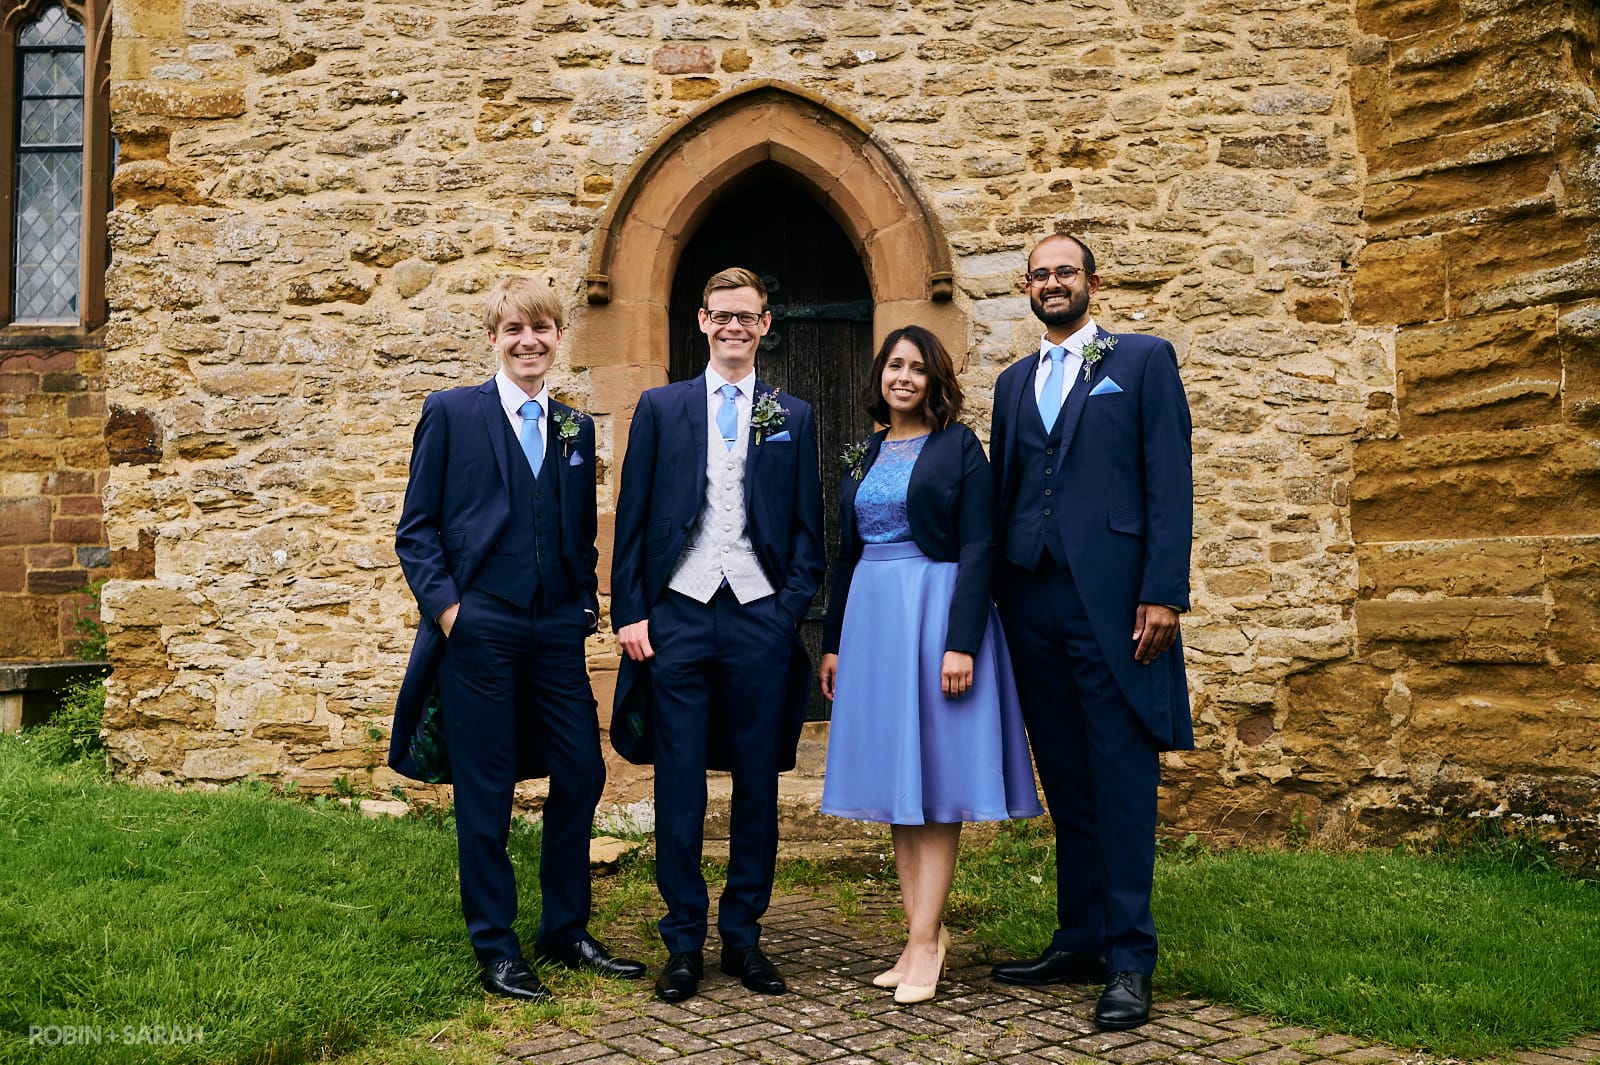 Group photo of groom and friends outside old church